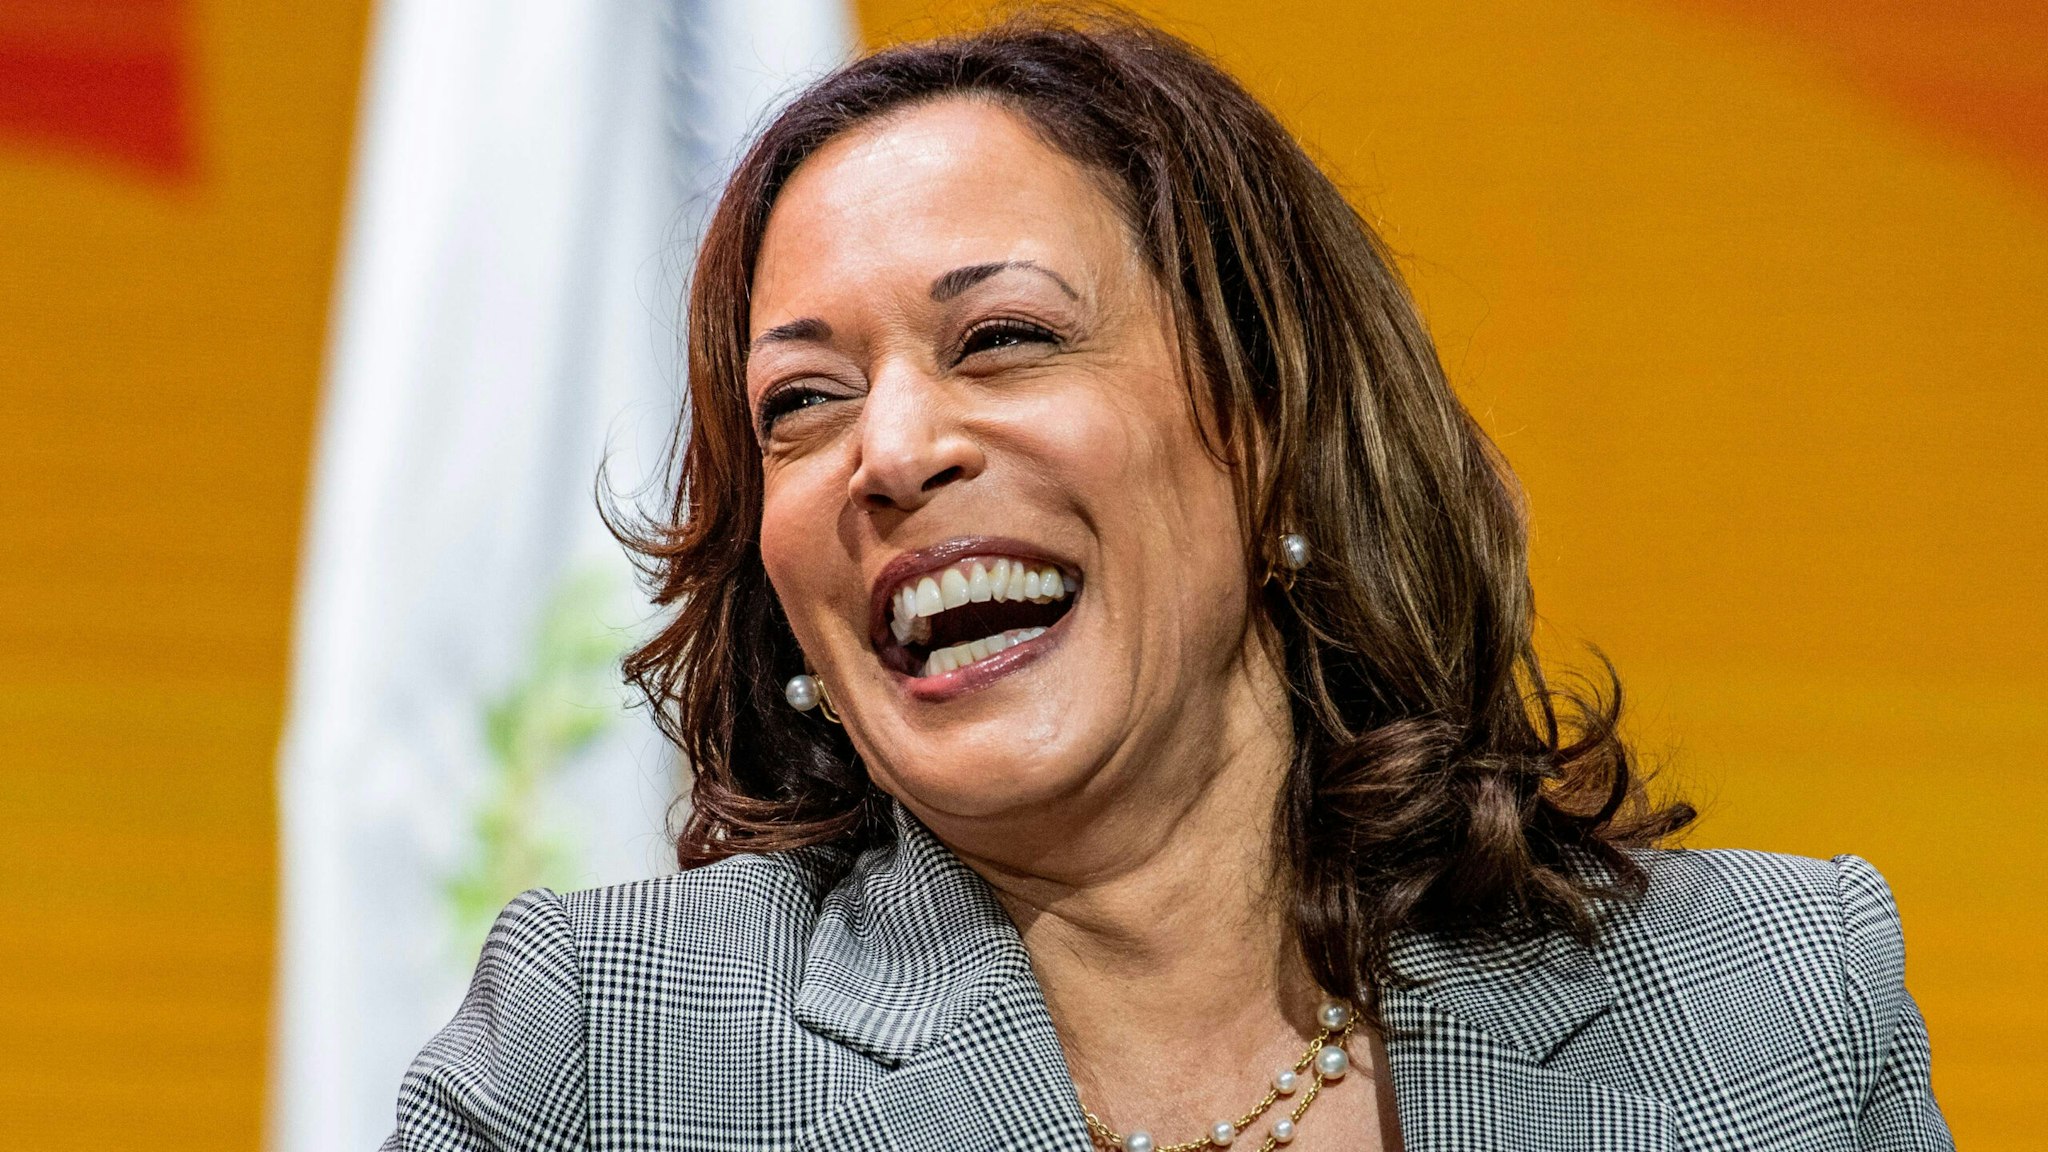 US Vice President Kamala Harris speaks at the Public Mass Meeting during the 114th National Association for the Advancement of Colored People (NAACP) National Convention in Boston, Massachusetts, on July 29, 2023.